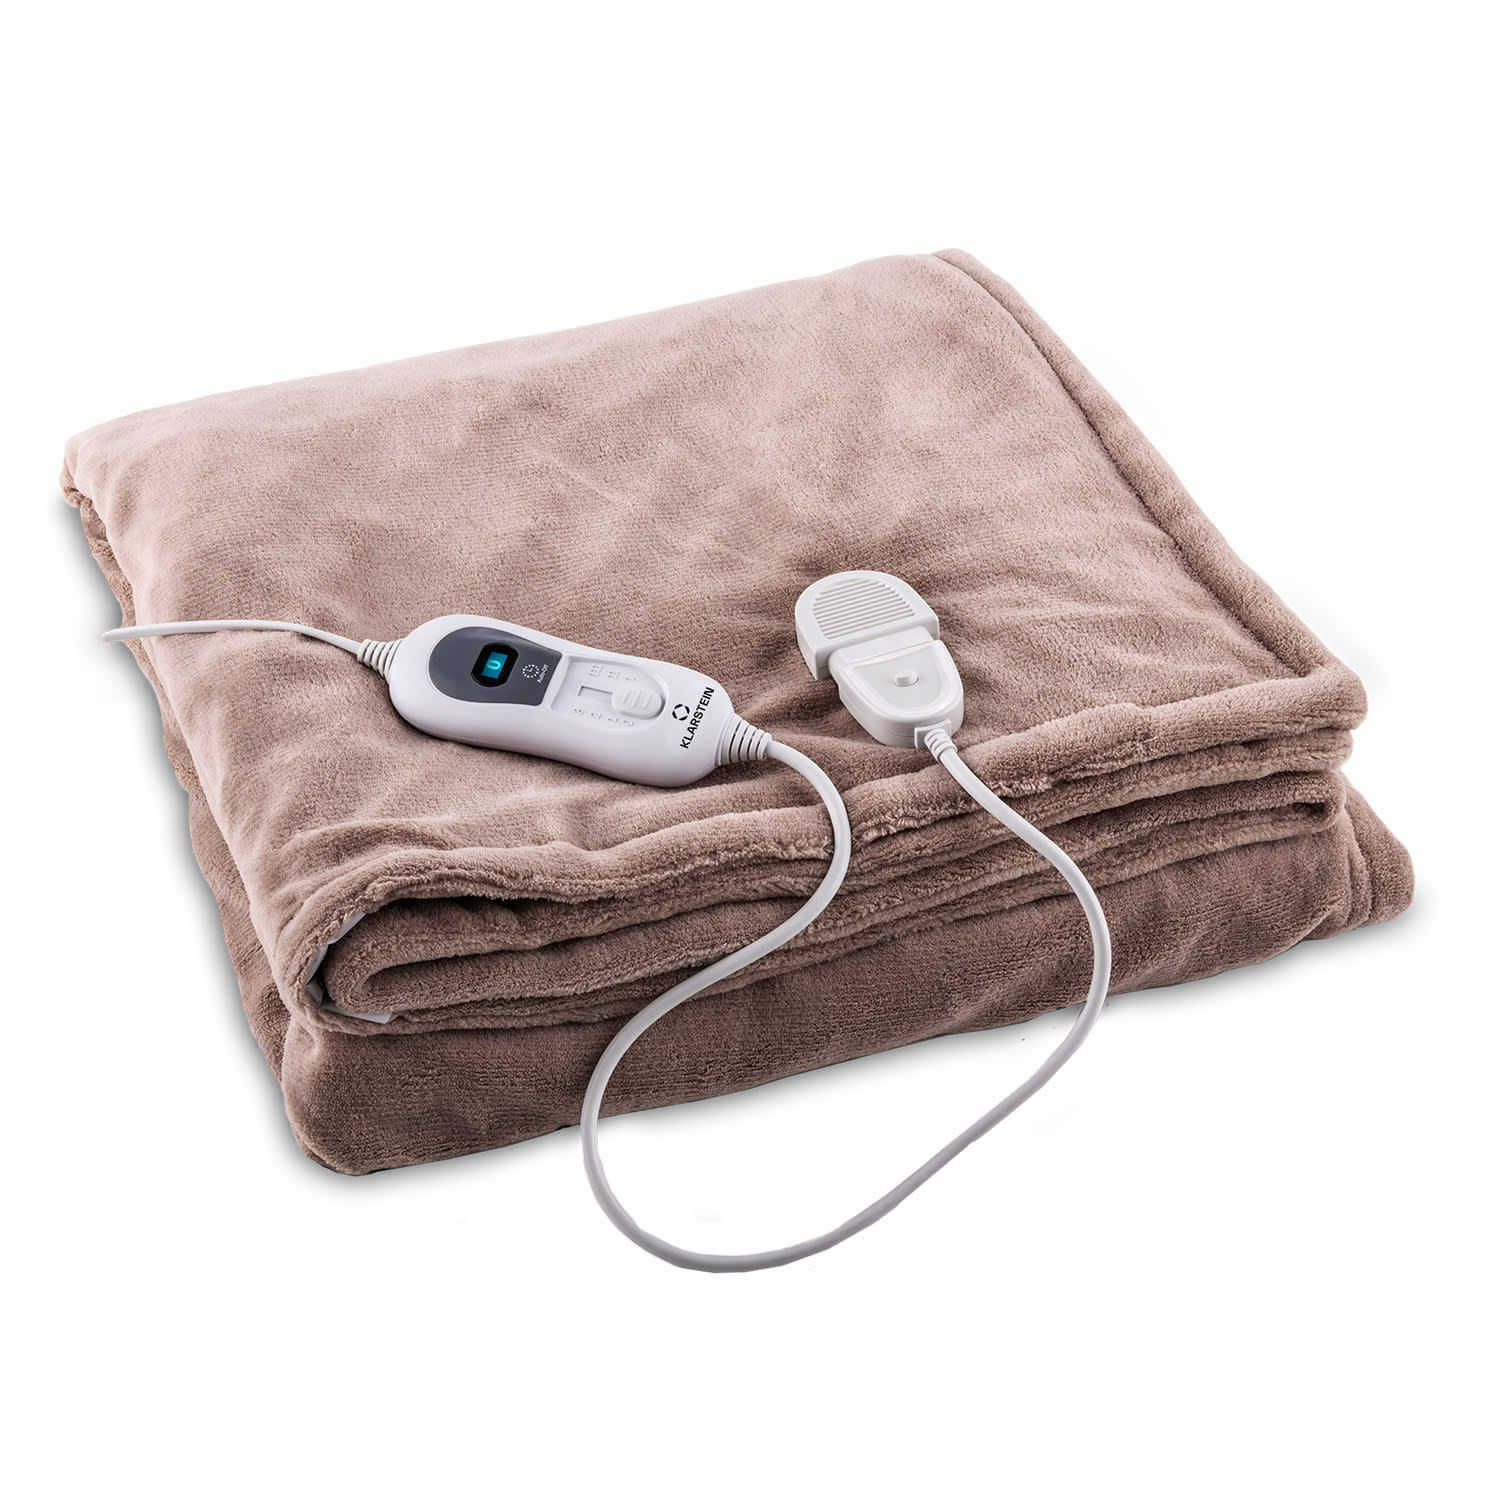 Solid color flannel electric blanket